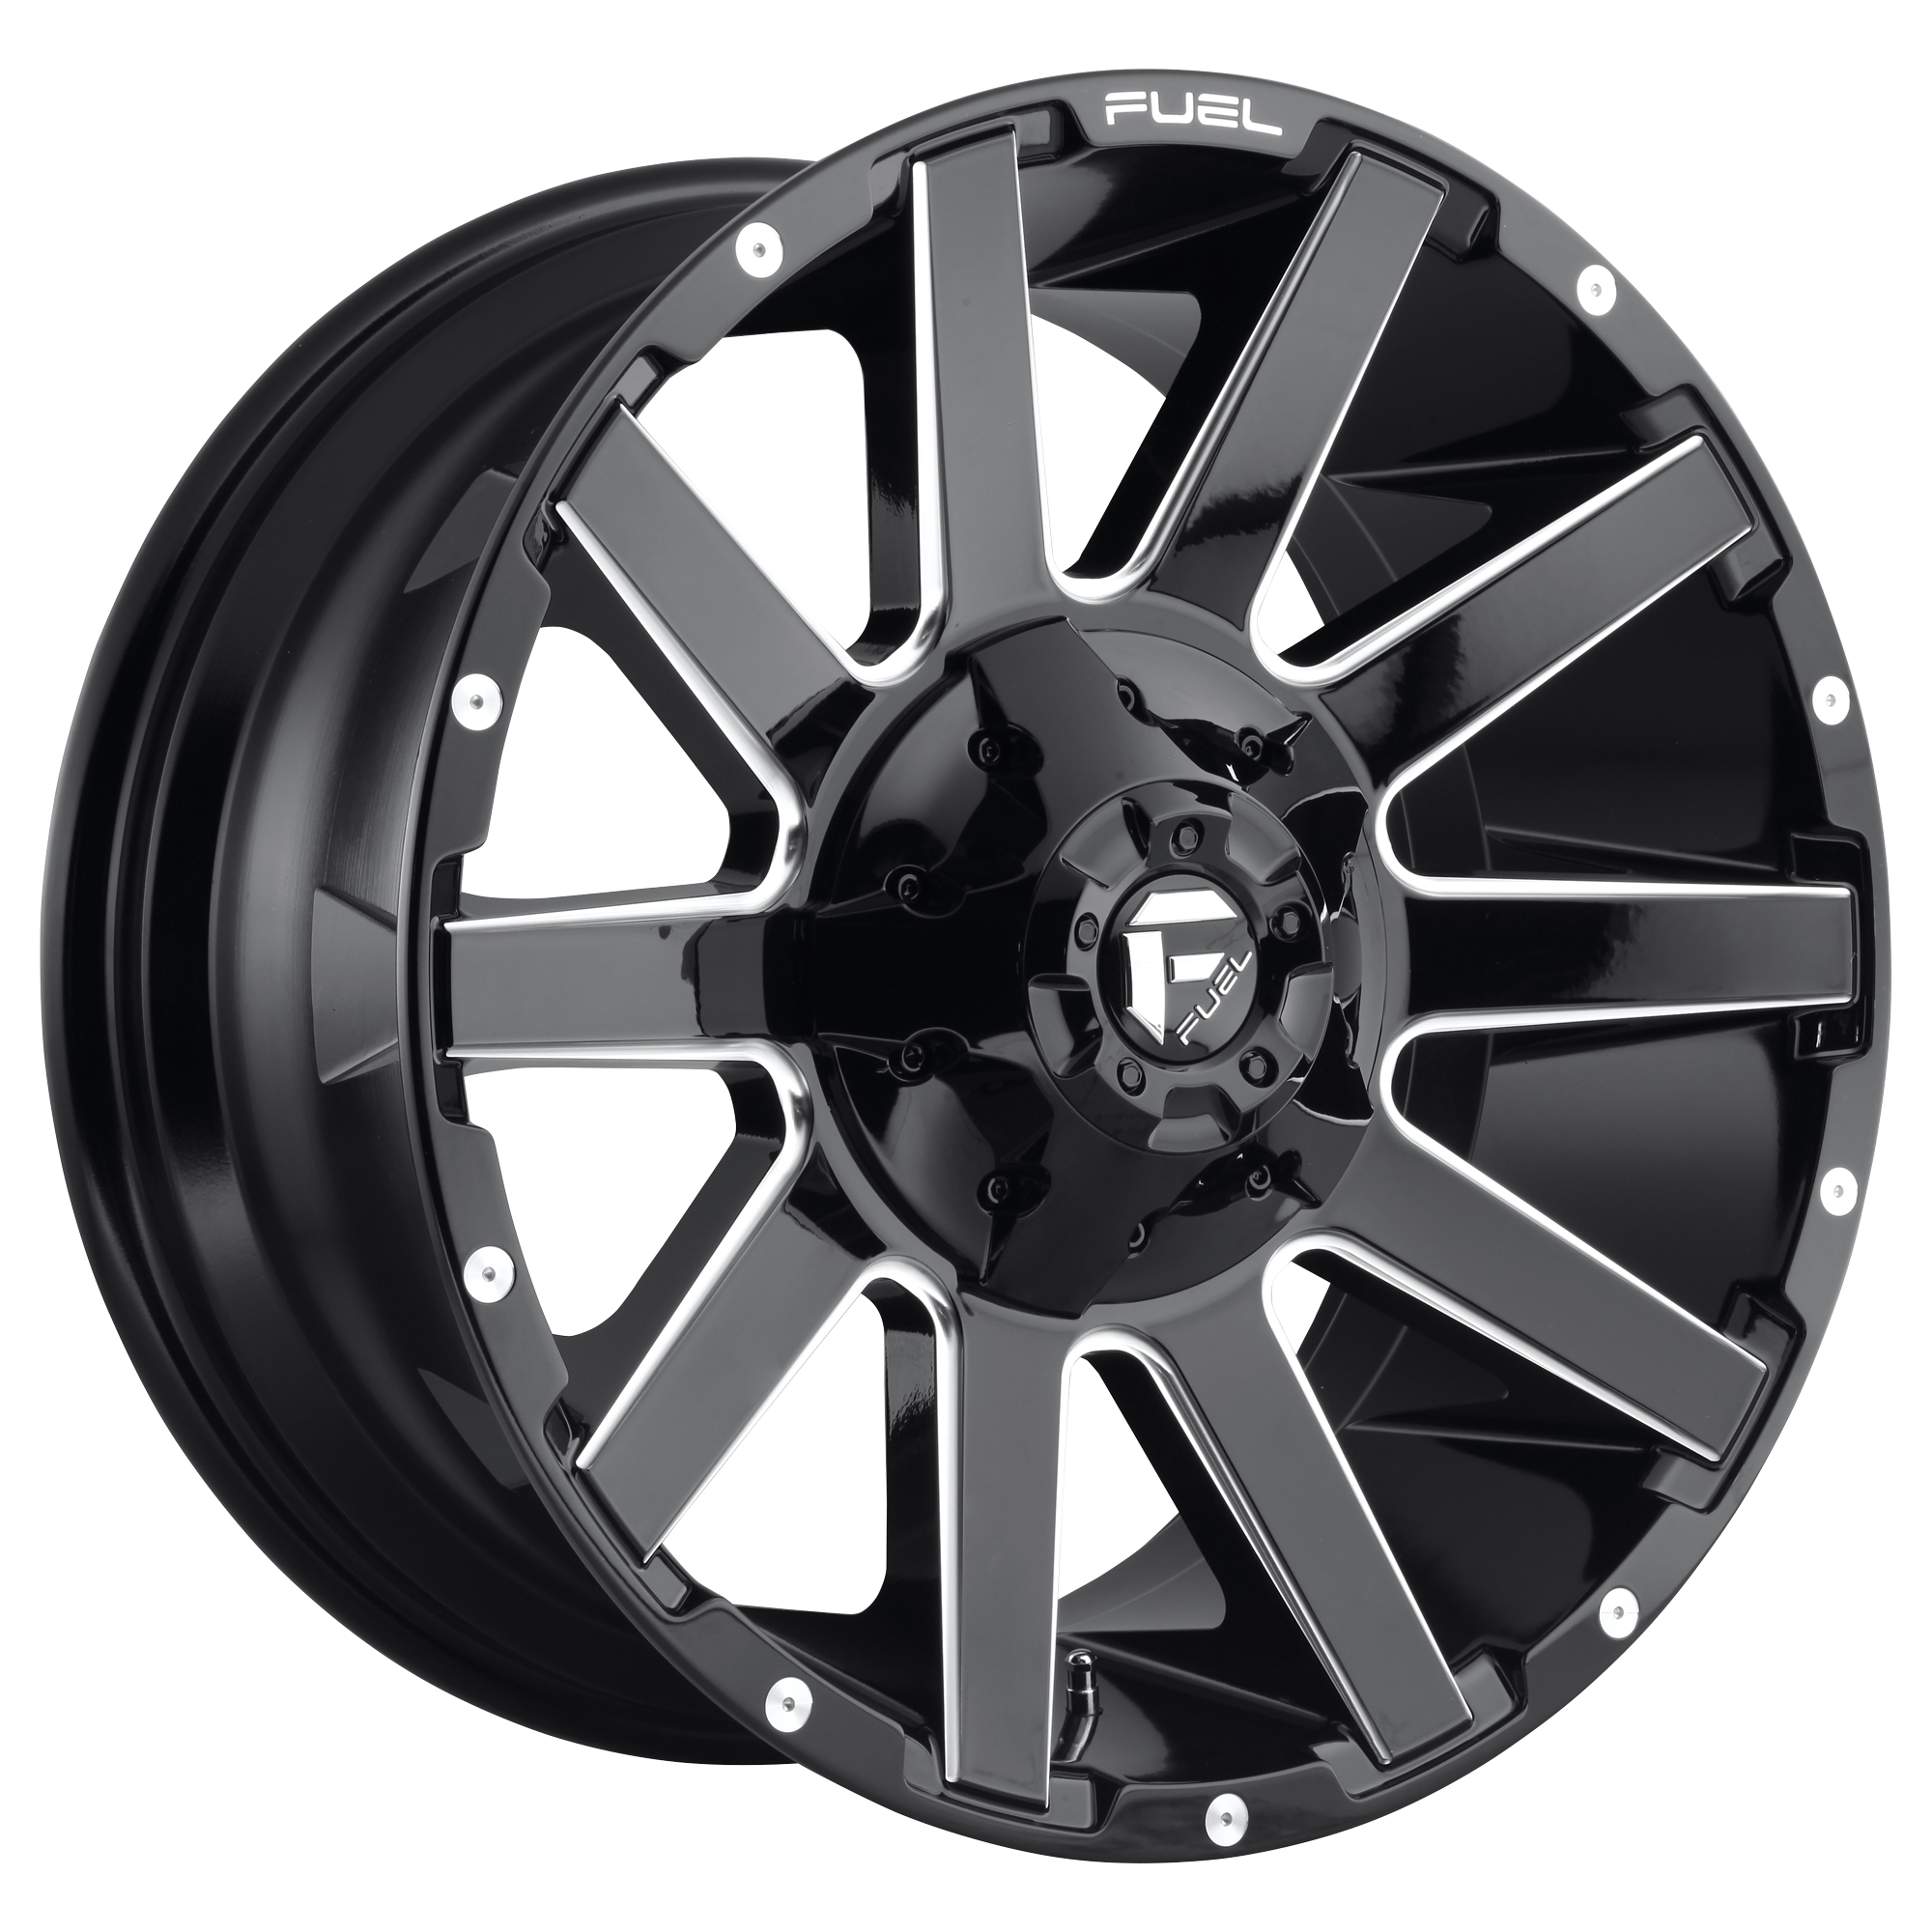 CONTRA 20x9 8x180.00 GLOSS BLACK MILLED (20 mm) - Tires and Engine Performance